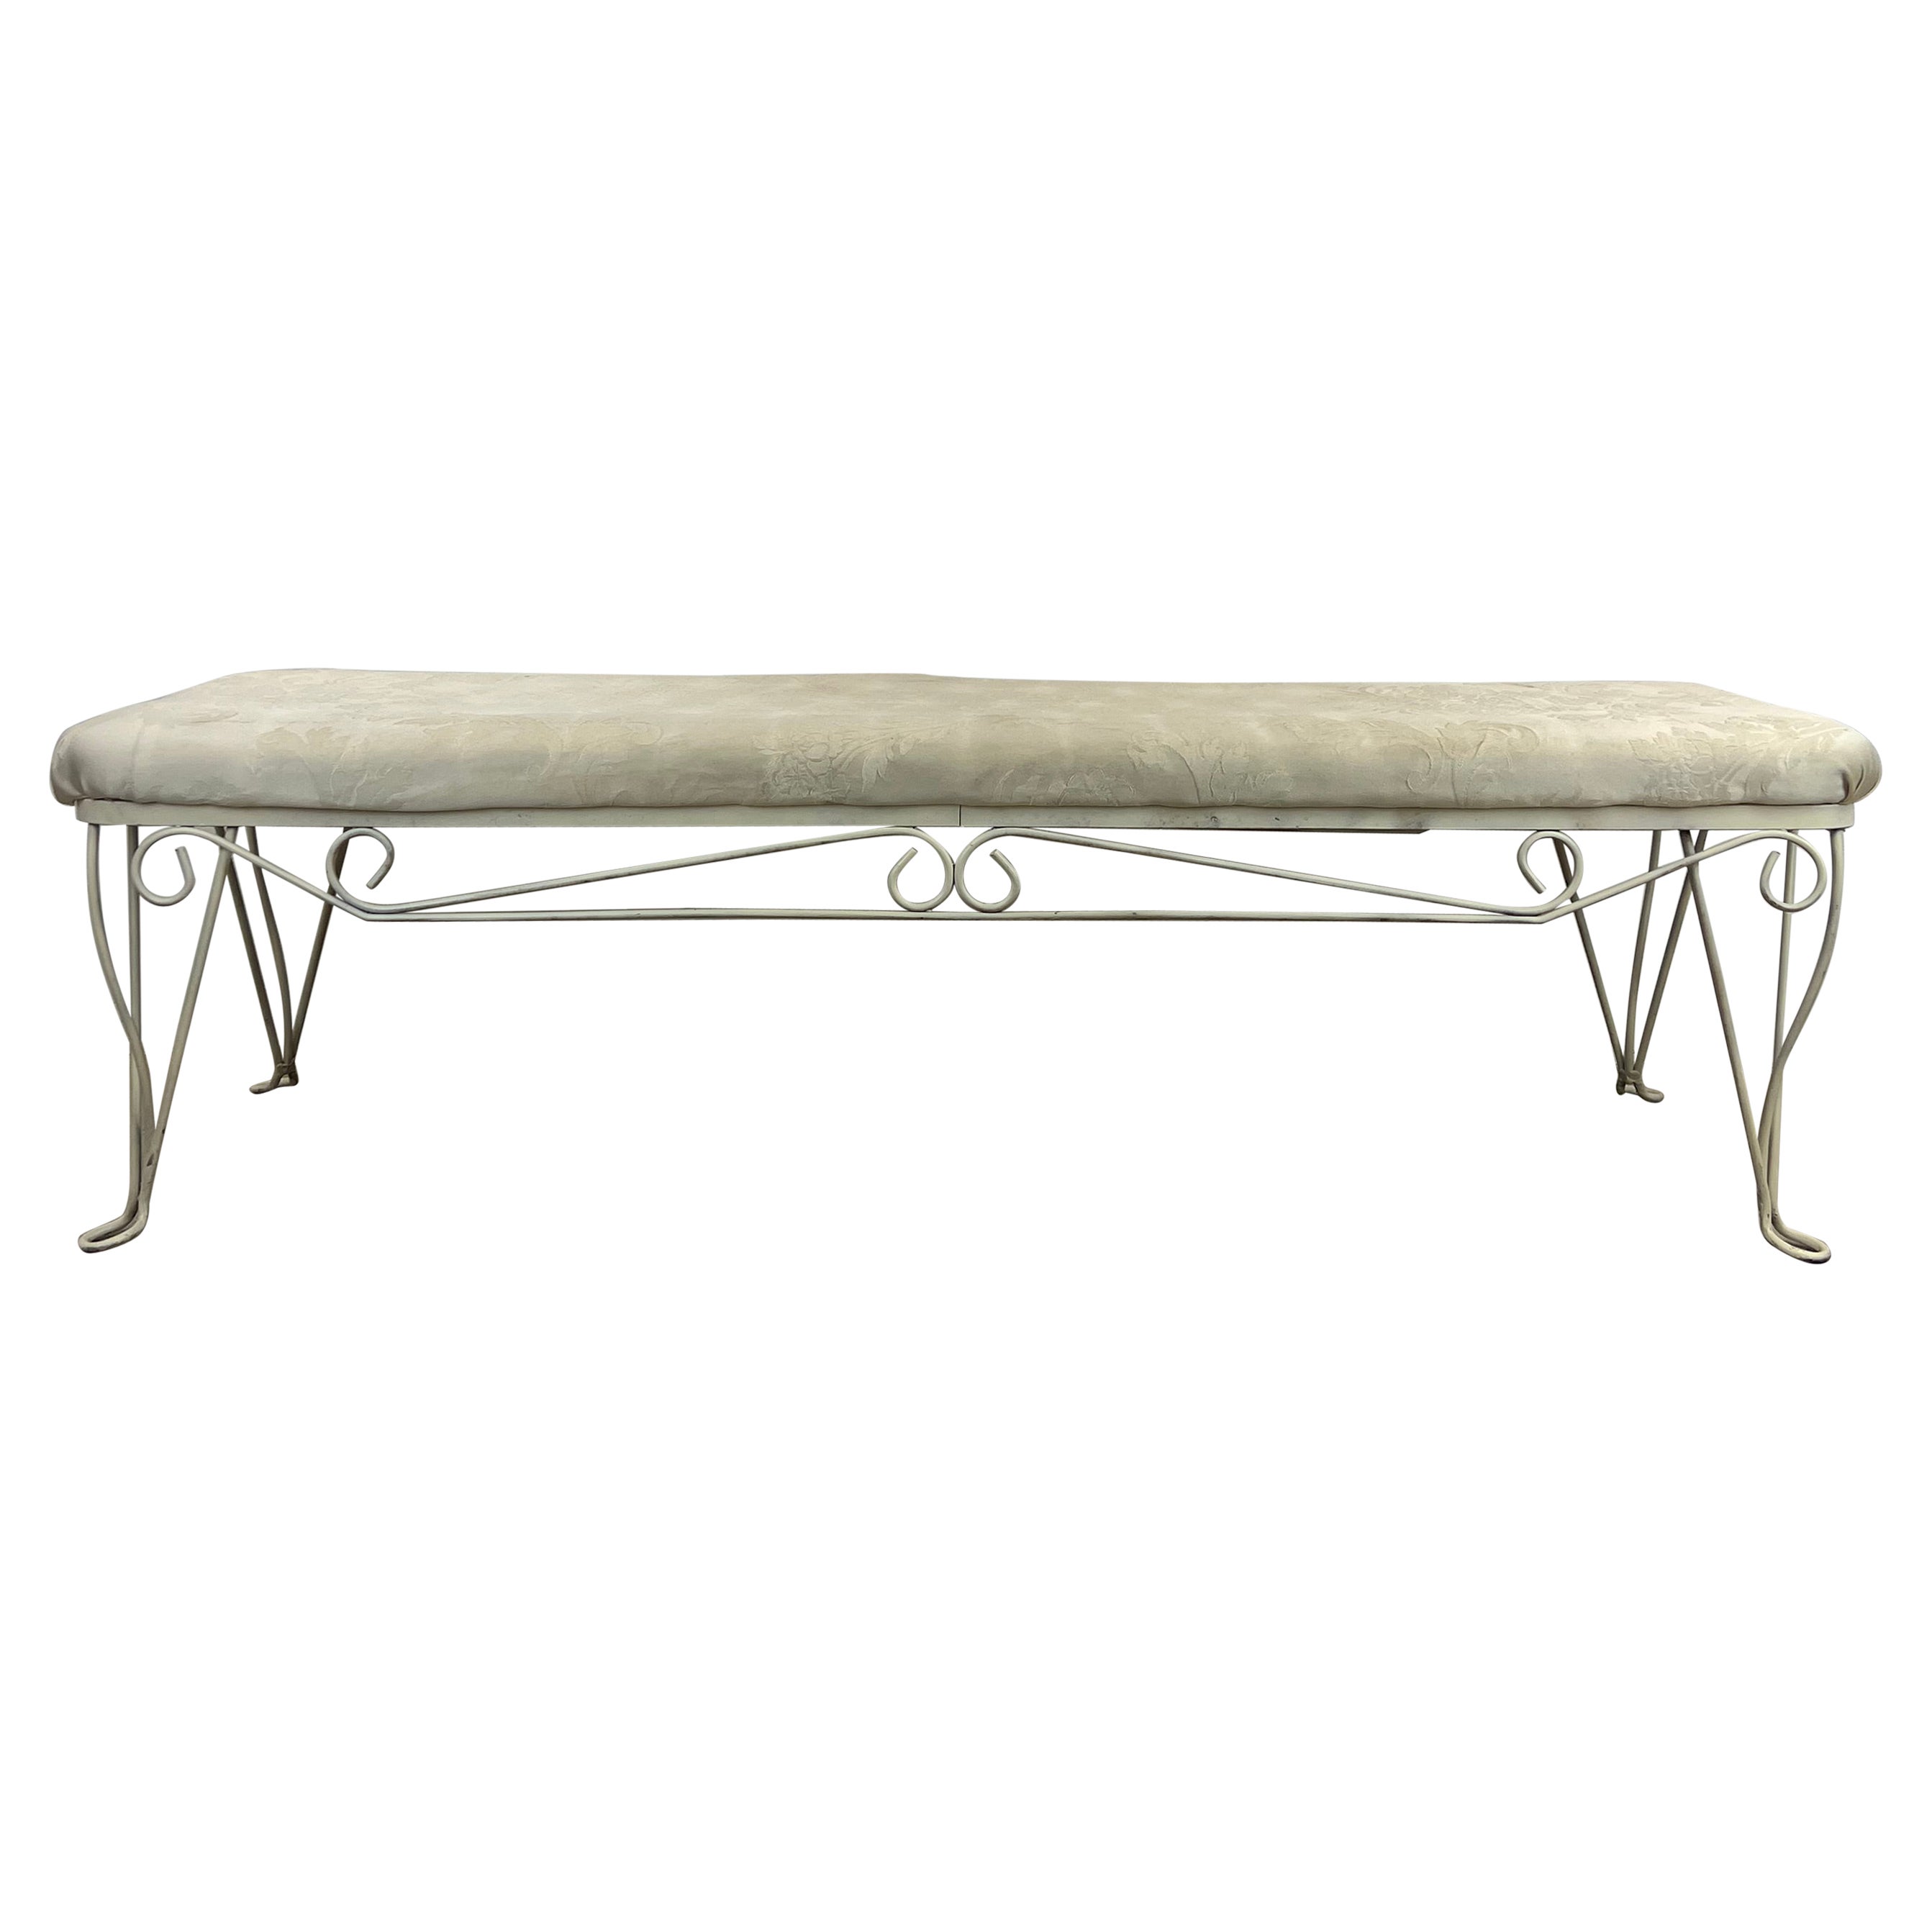 Hollywood Regency Style Upholstered Bench with Wrought Iron Frame For Sale